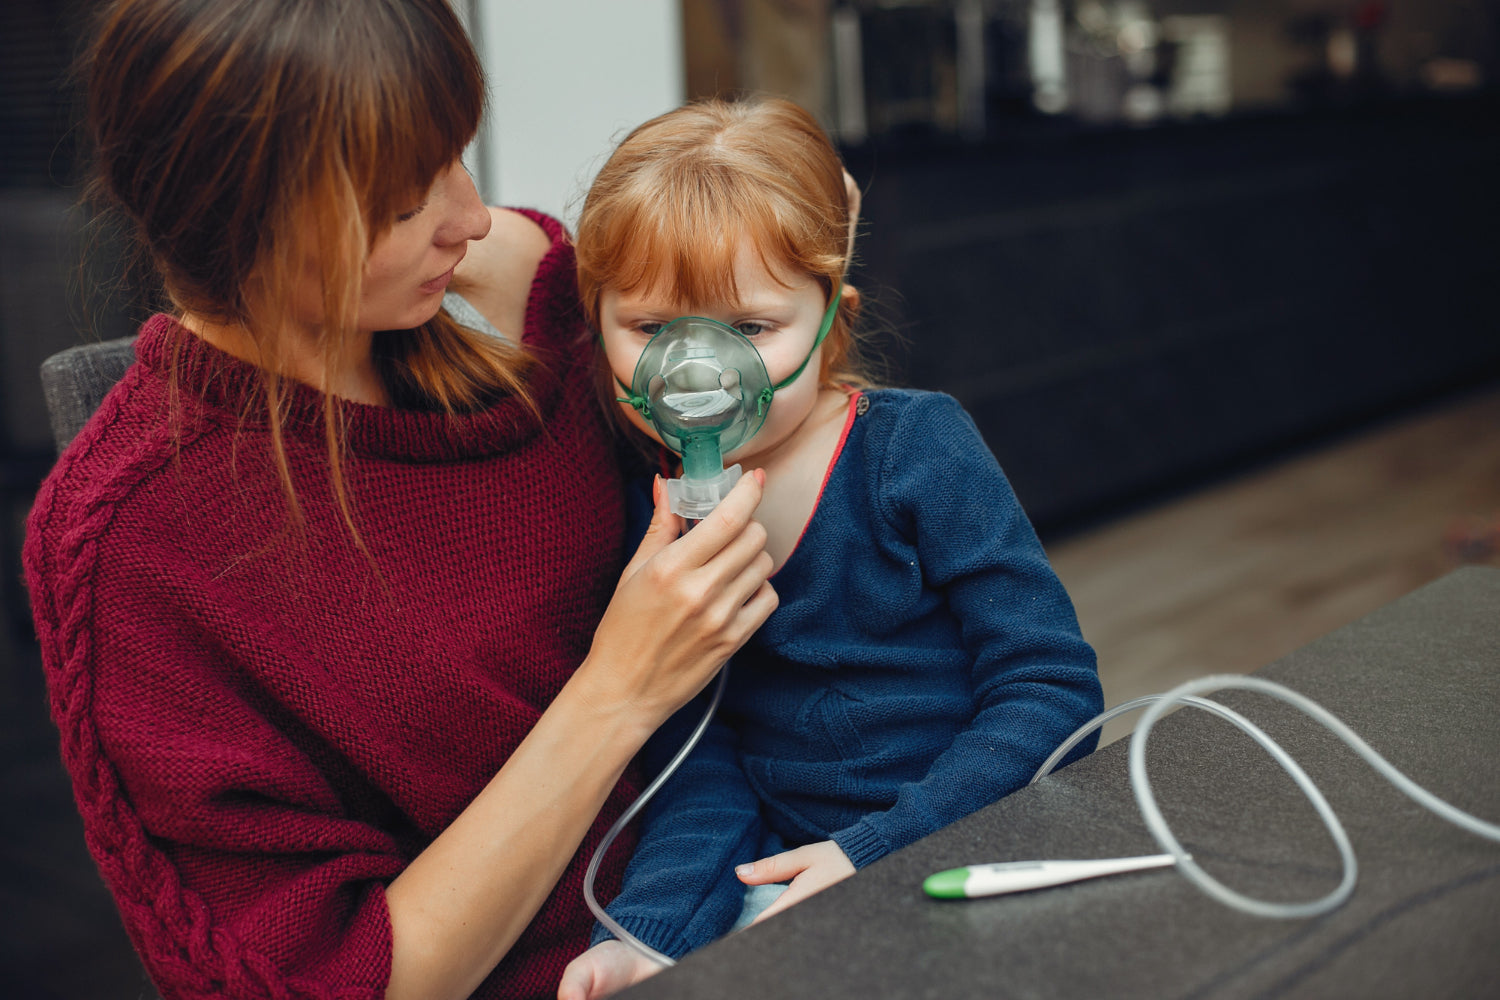 Common Nebulizer Problems and How to Troubleshoot Them